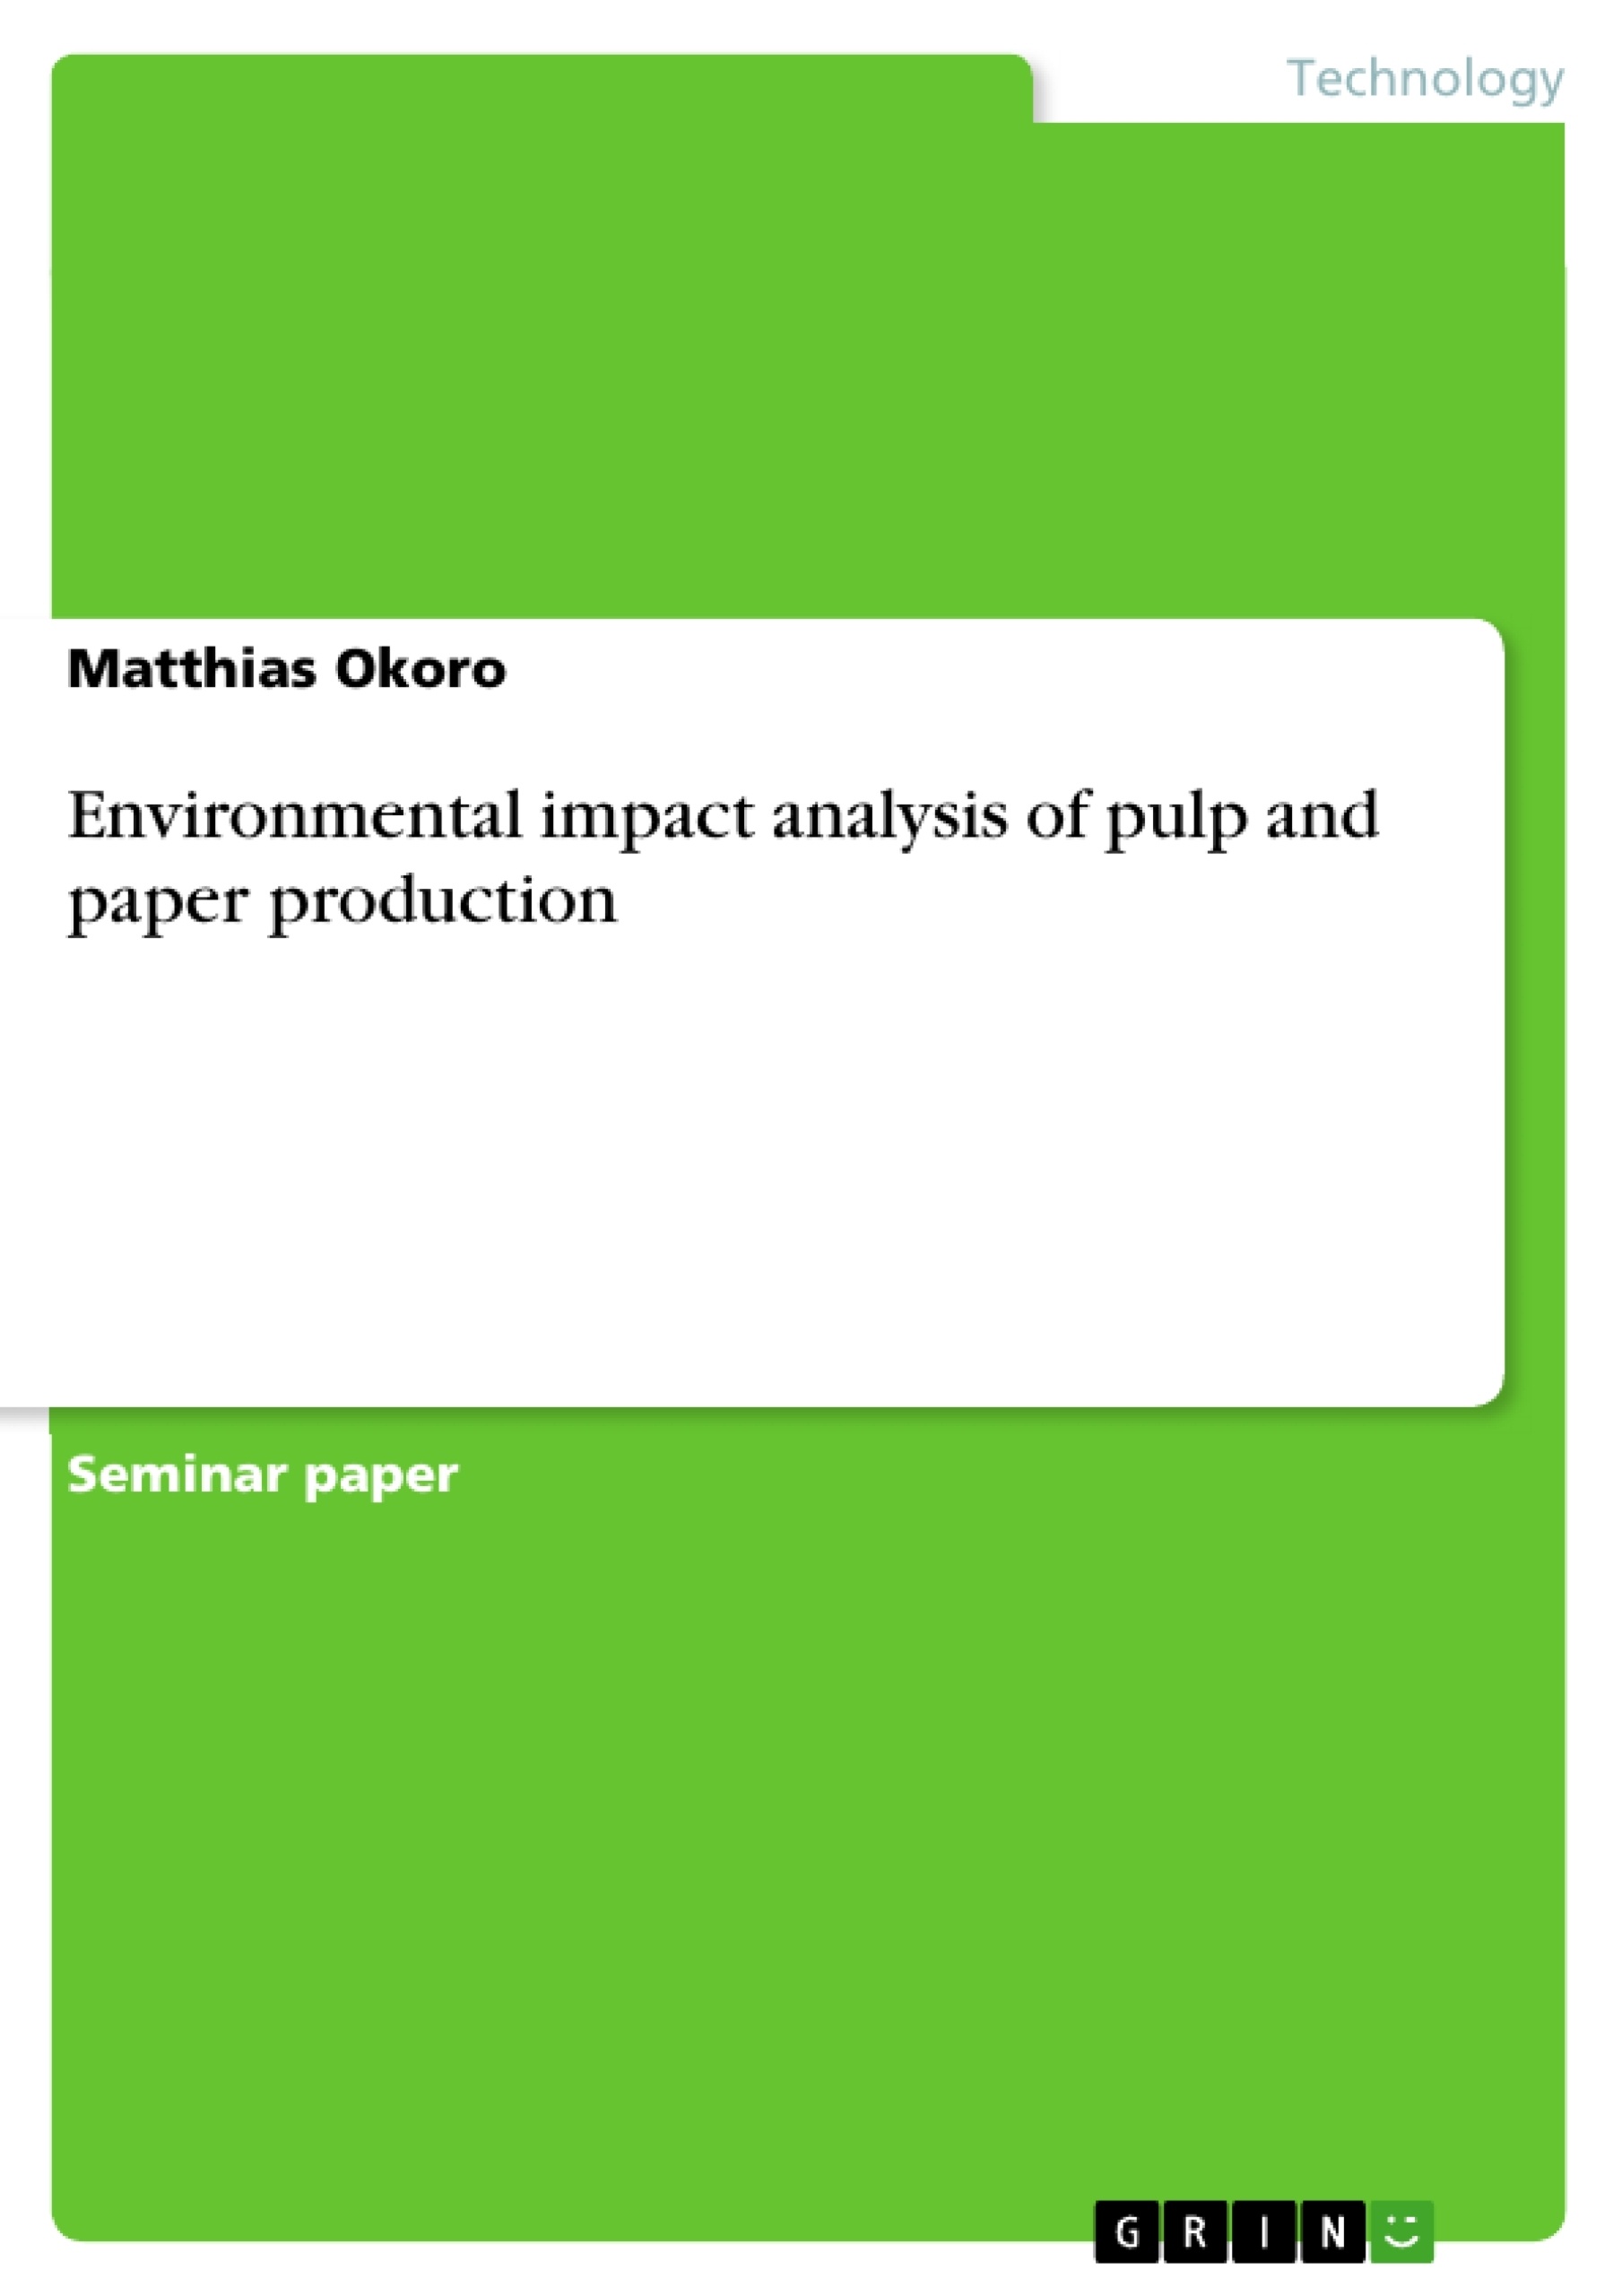 Title: Environmental impact analysis of pulp and paper production